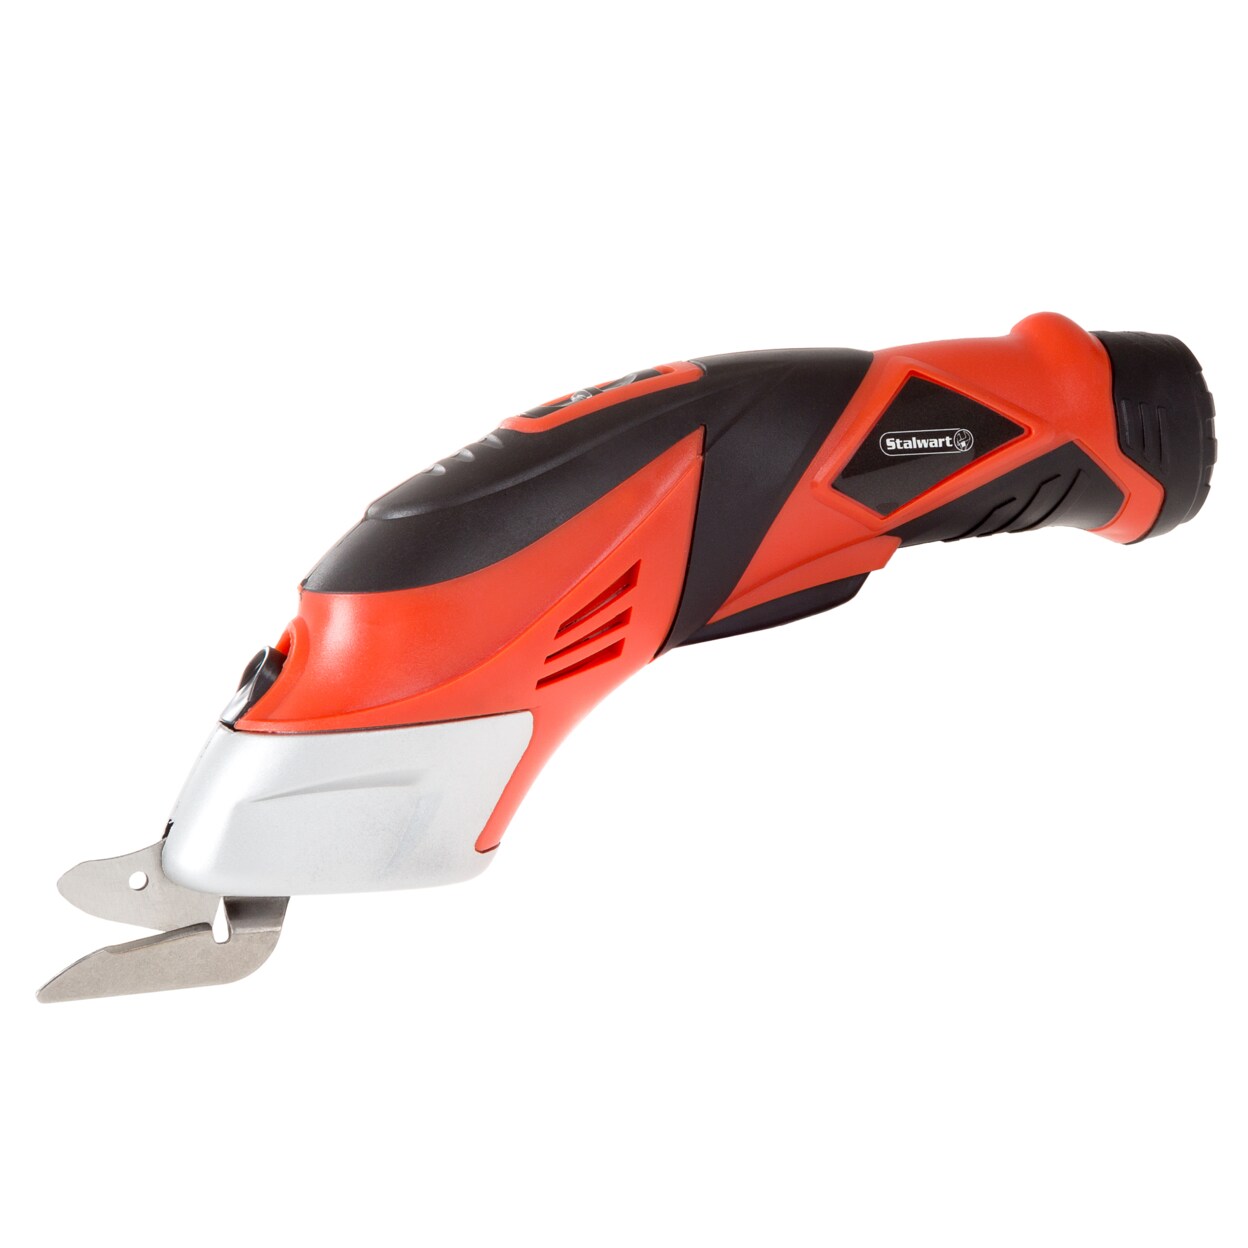 Stalwart Cordless Power Scissors With Two Blades - Fabric Leather Carpet and Cardboard Cutter- 3.6V NiCad Lithium Ion